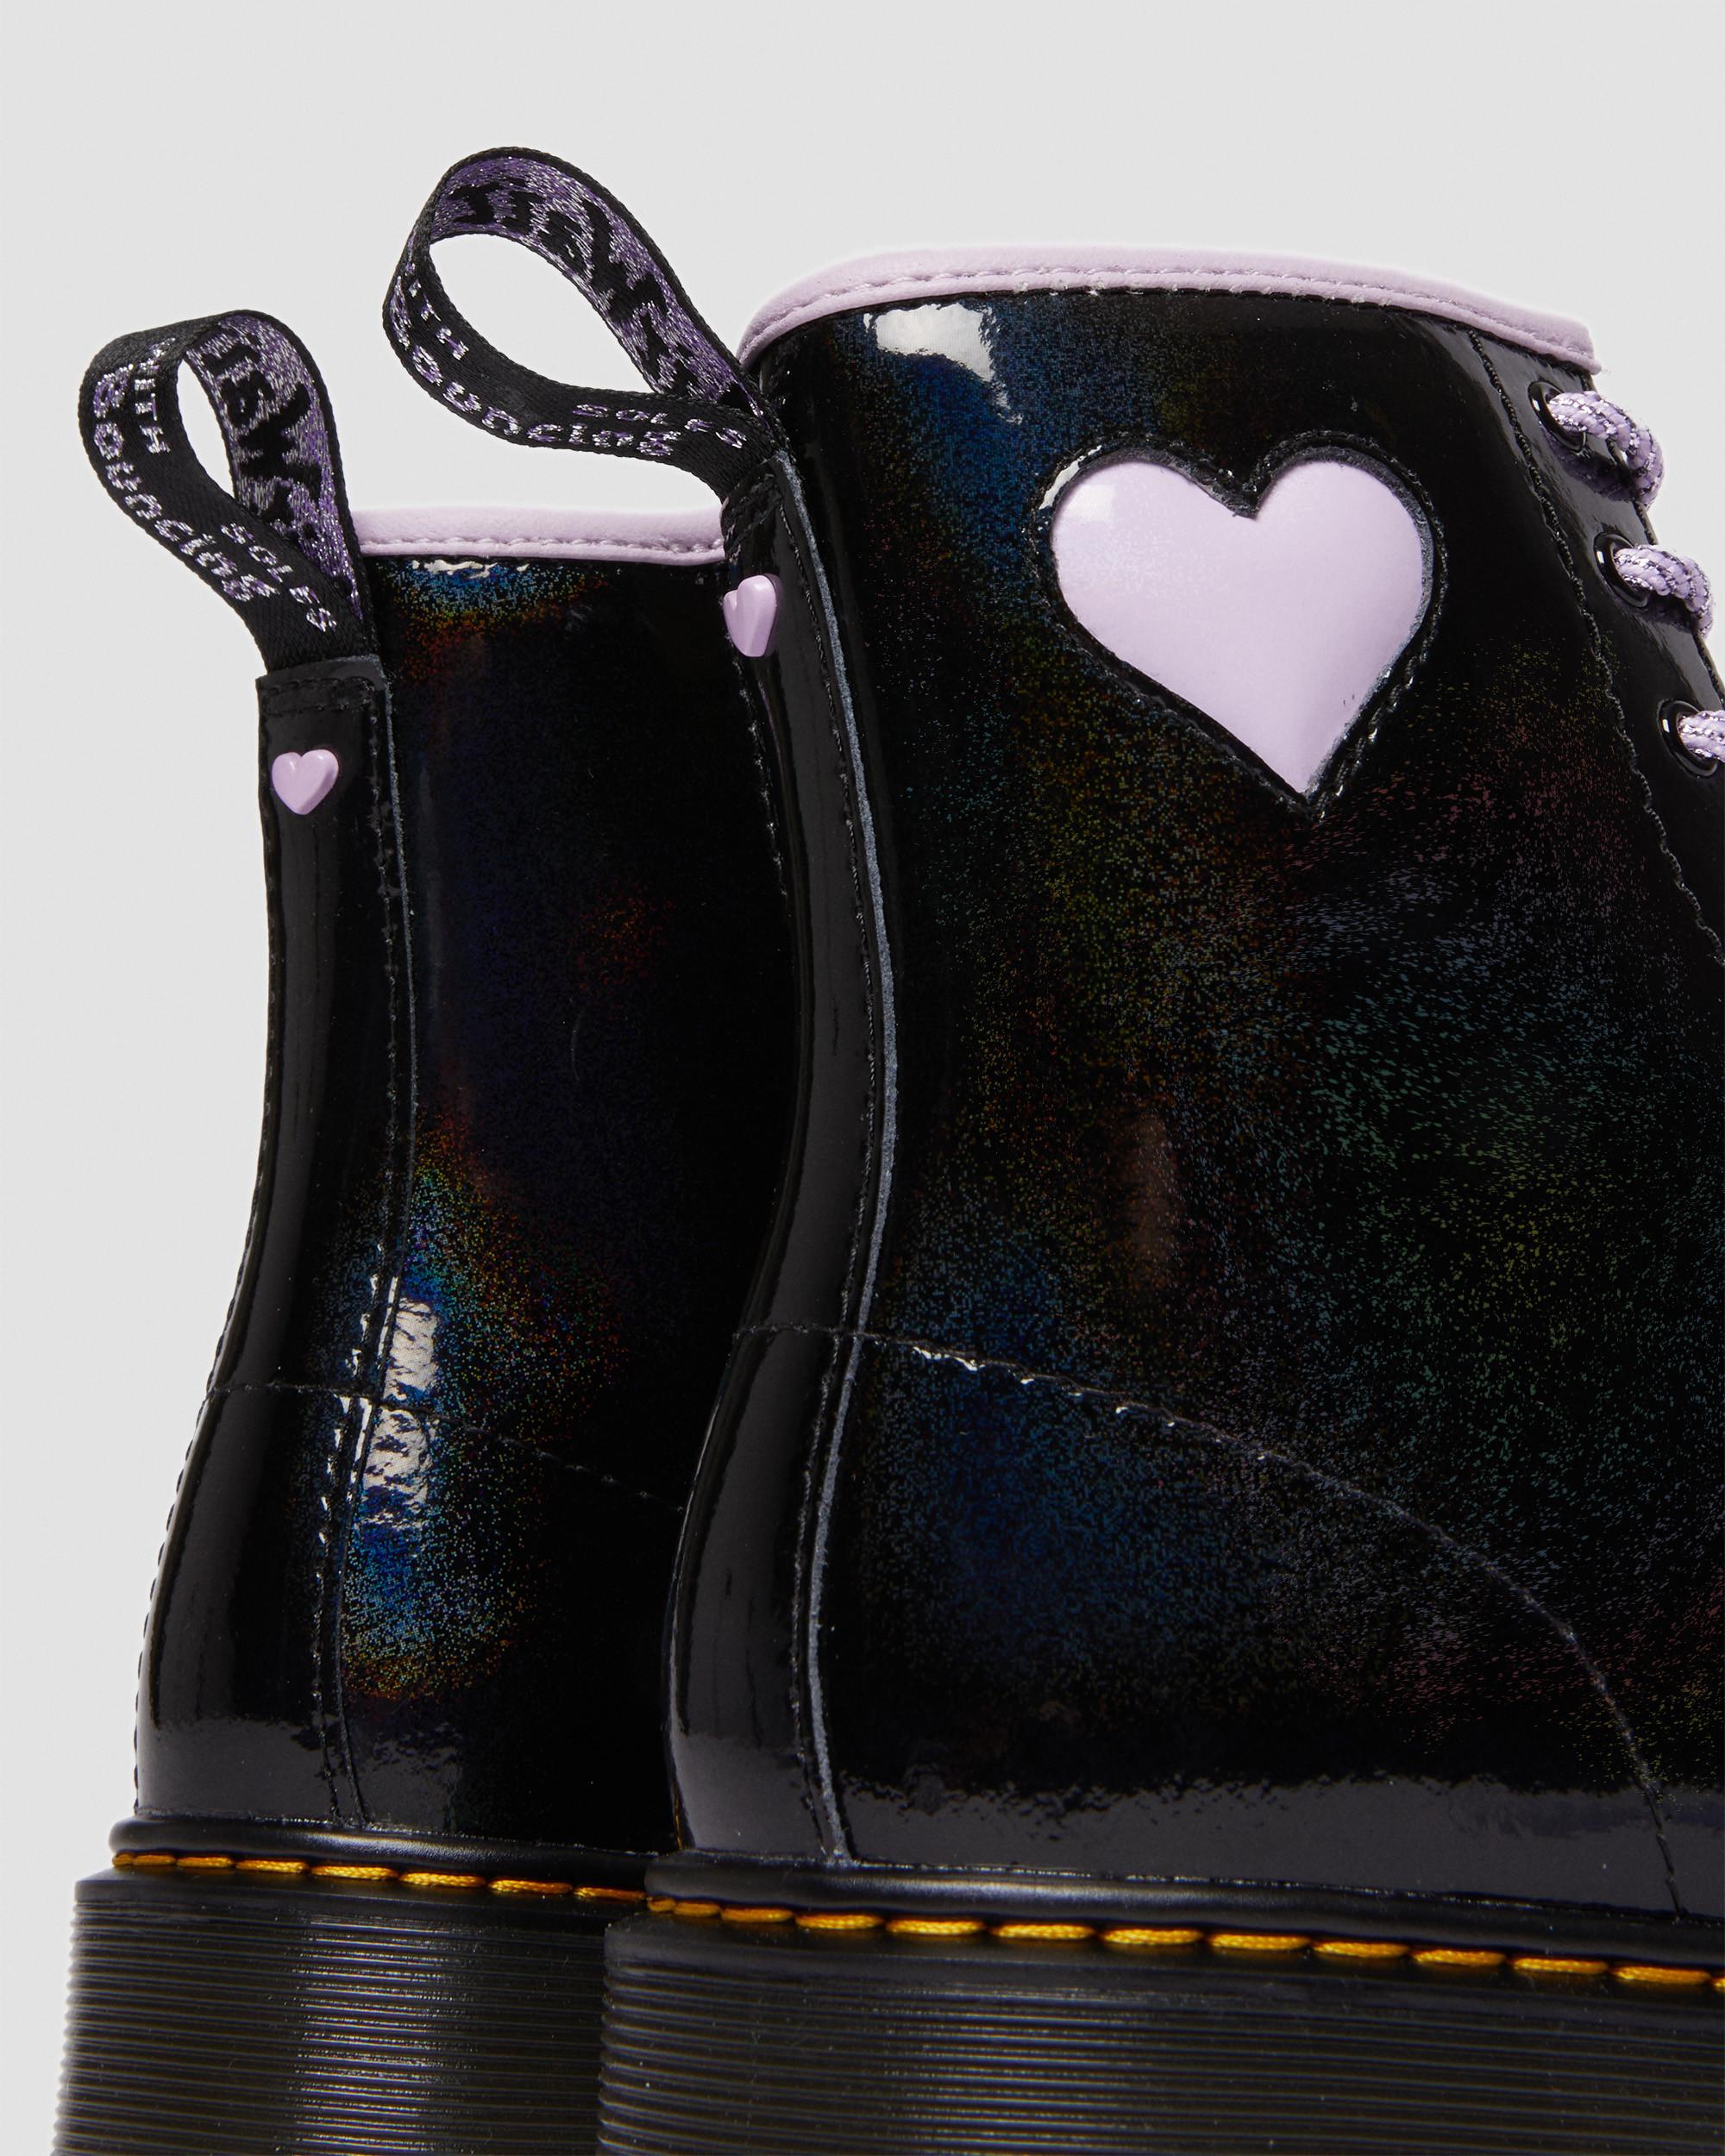 Black | Boots Up Shimmer Lace Dr. Heart Martens Youth 1460 in